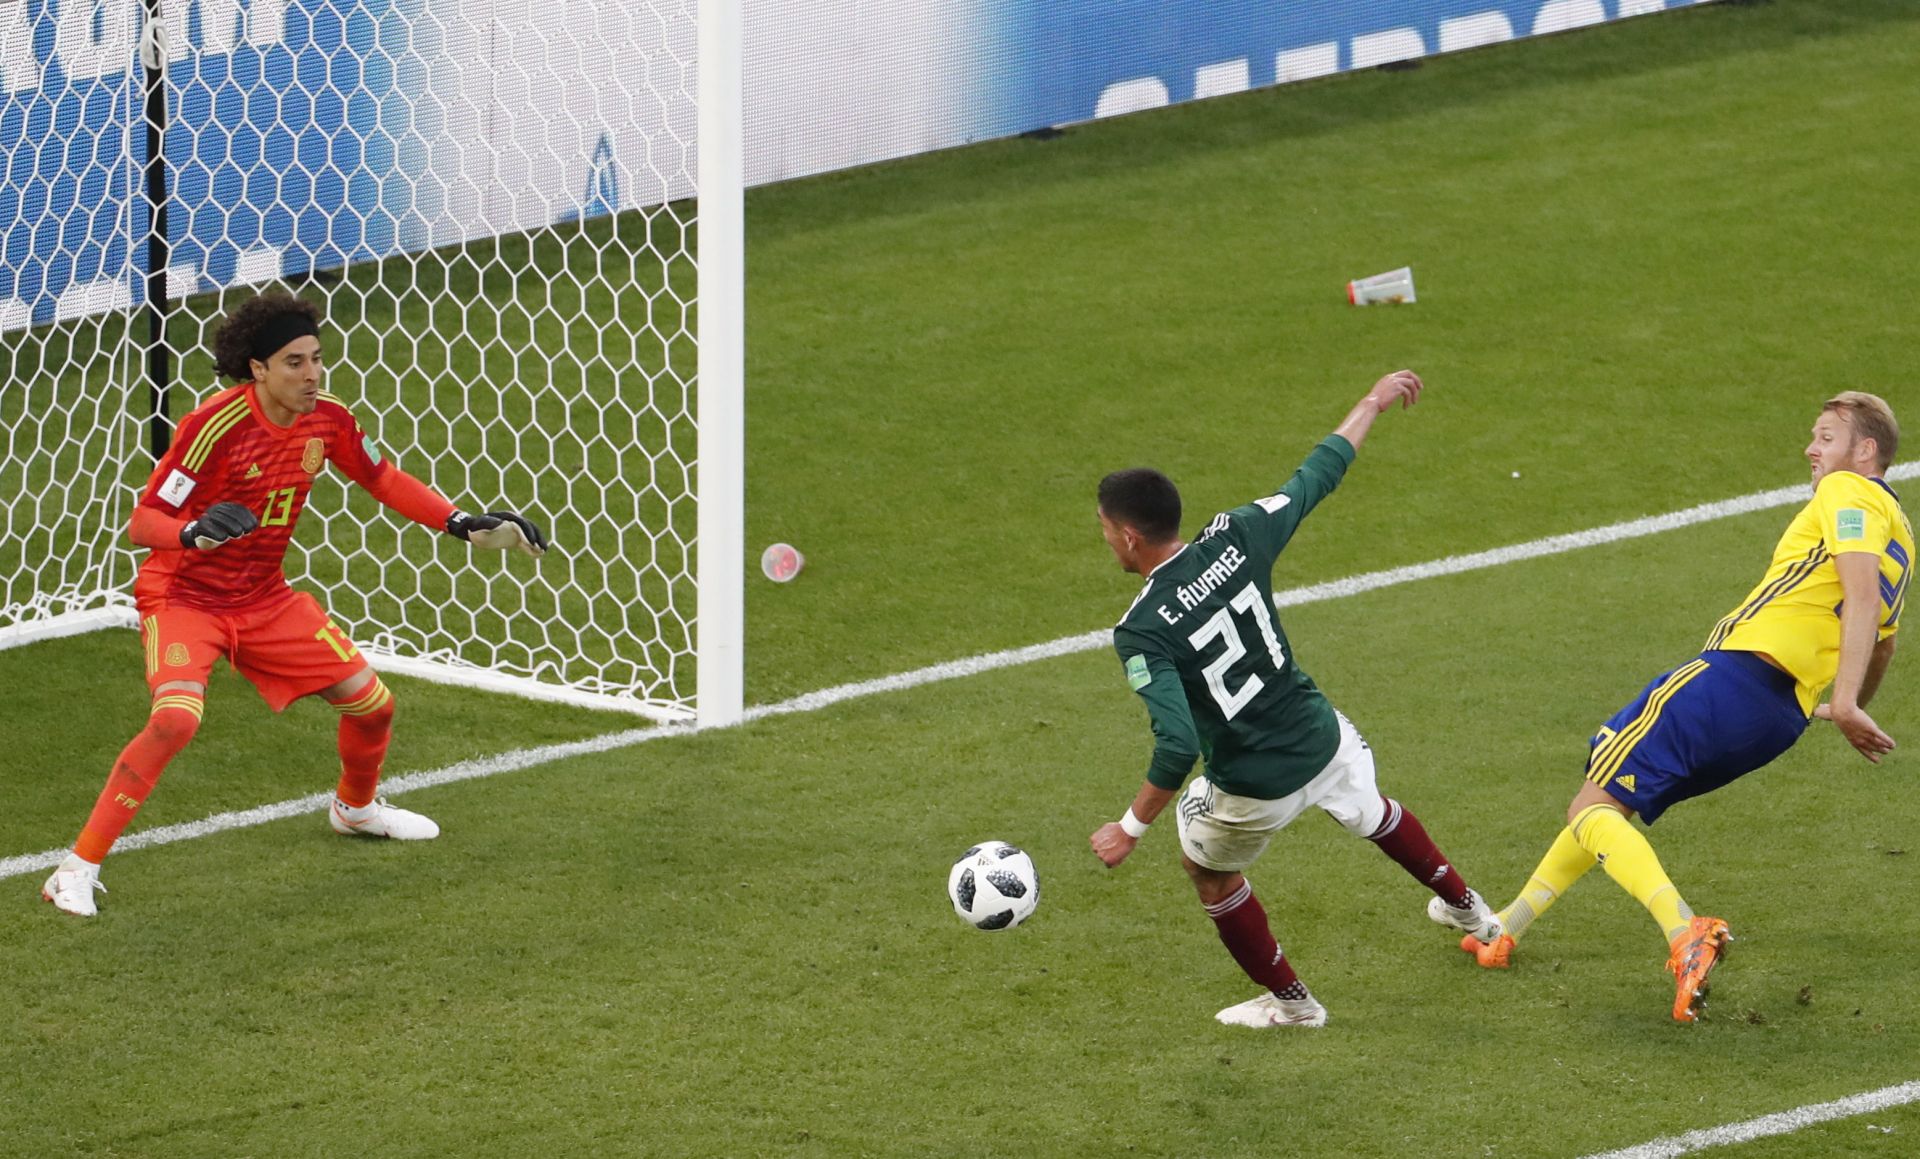 Edson Alvarez (C) of Mexico scores an own goal during the FIFA World Cup 2018 group F preliminary round soccer match between Mexico and Sweden in Ekaterinburg, Russia, 27 June 2018.